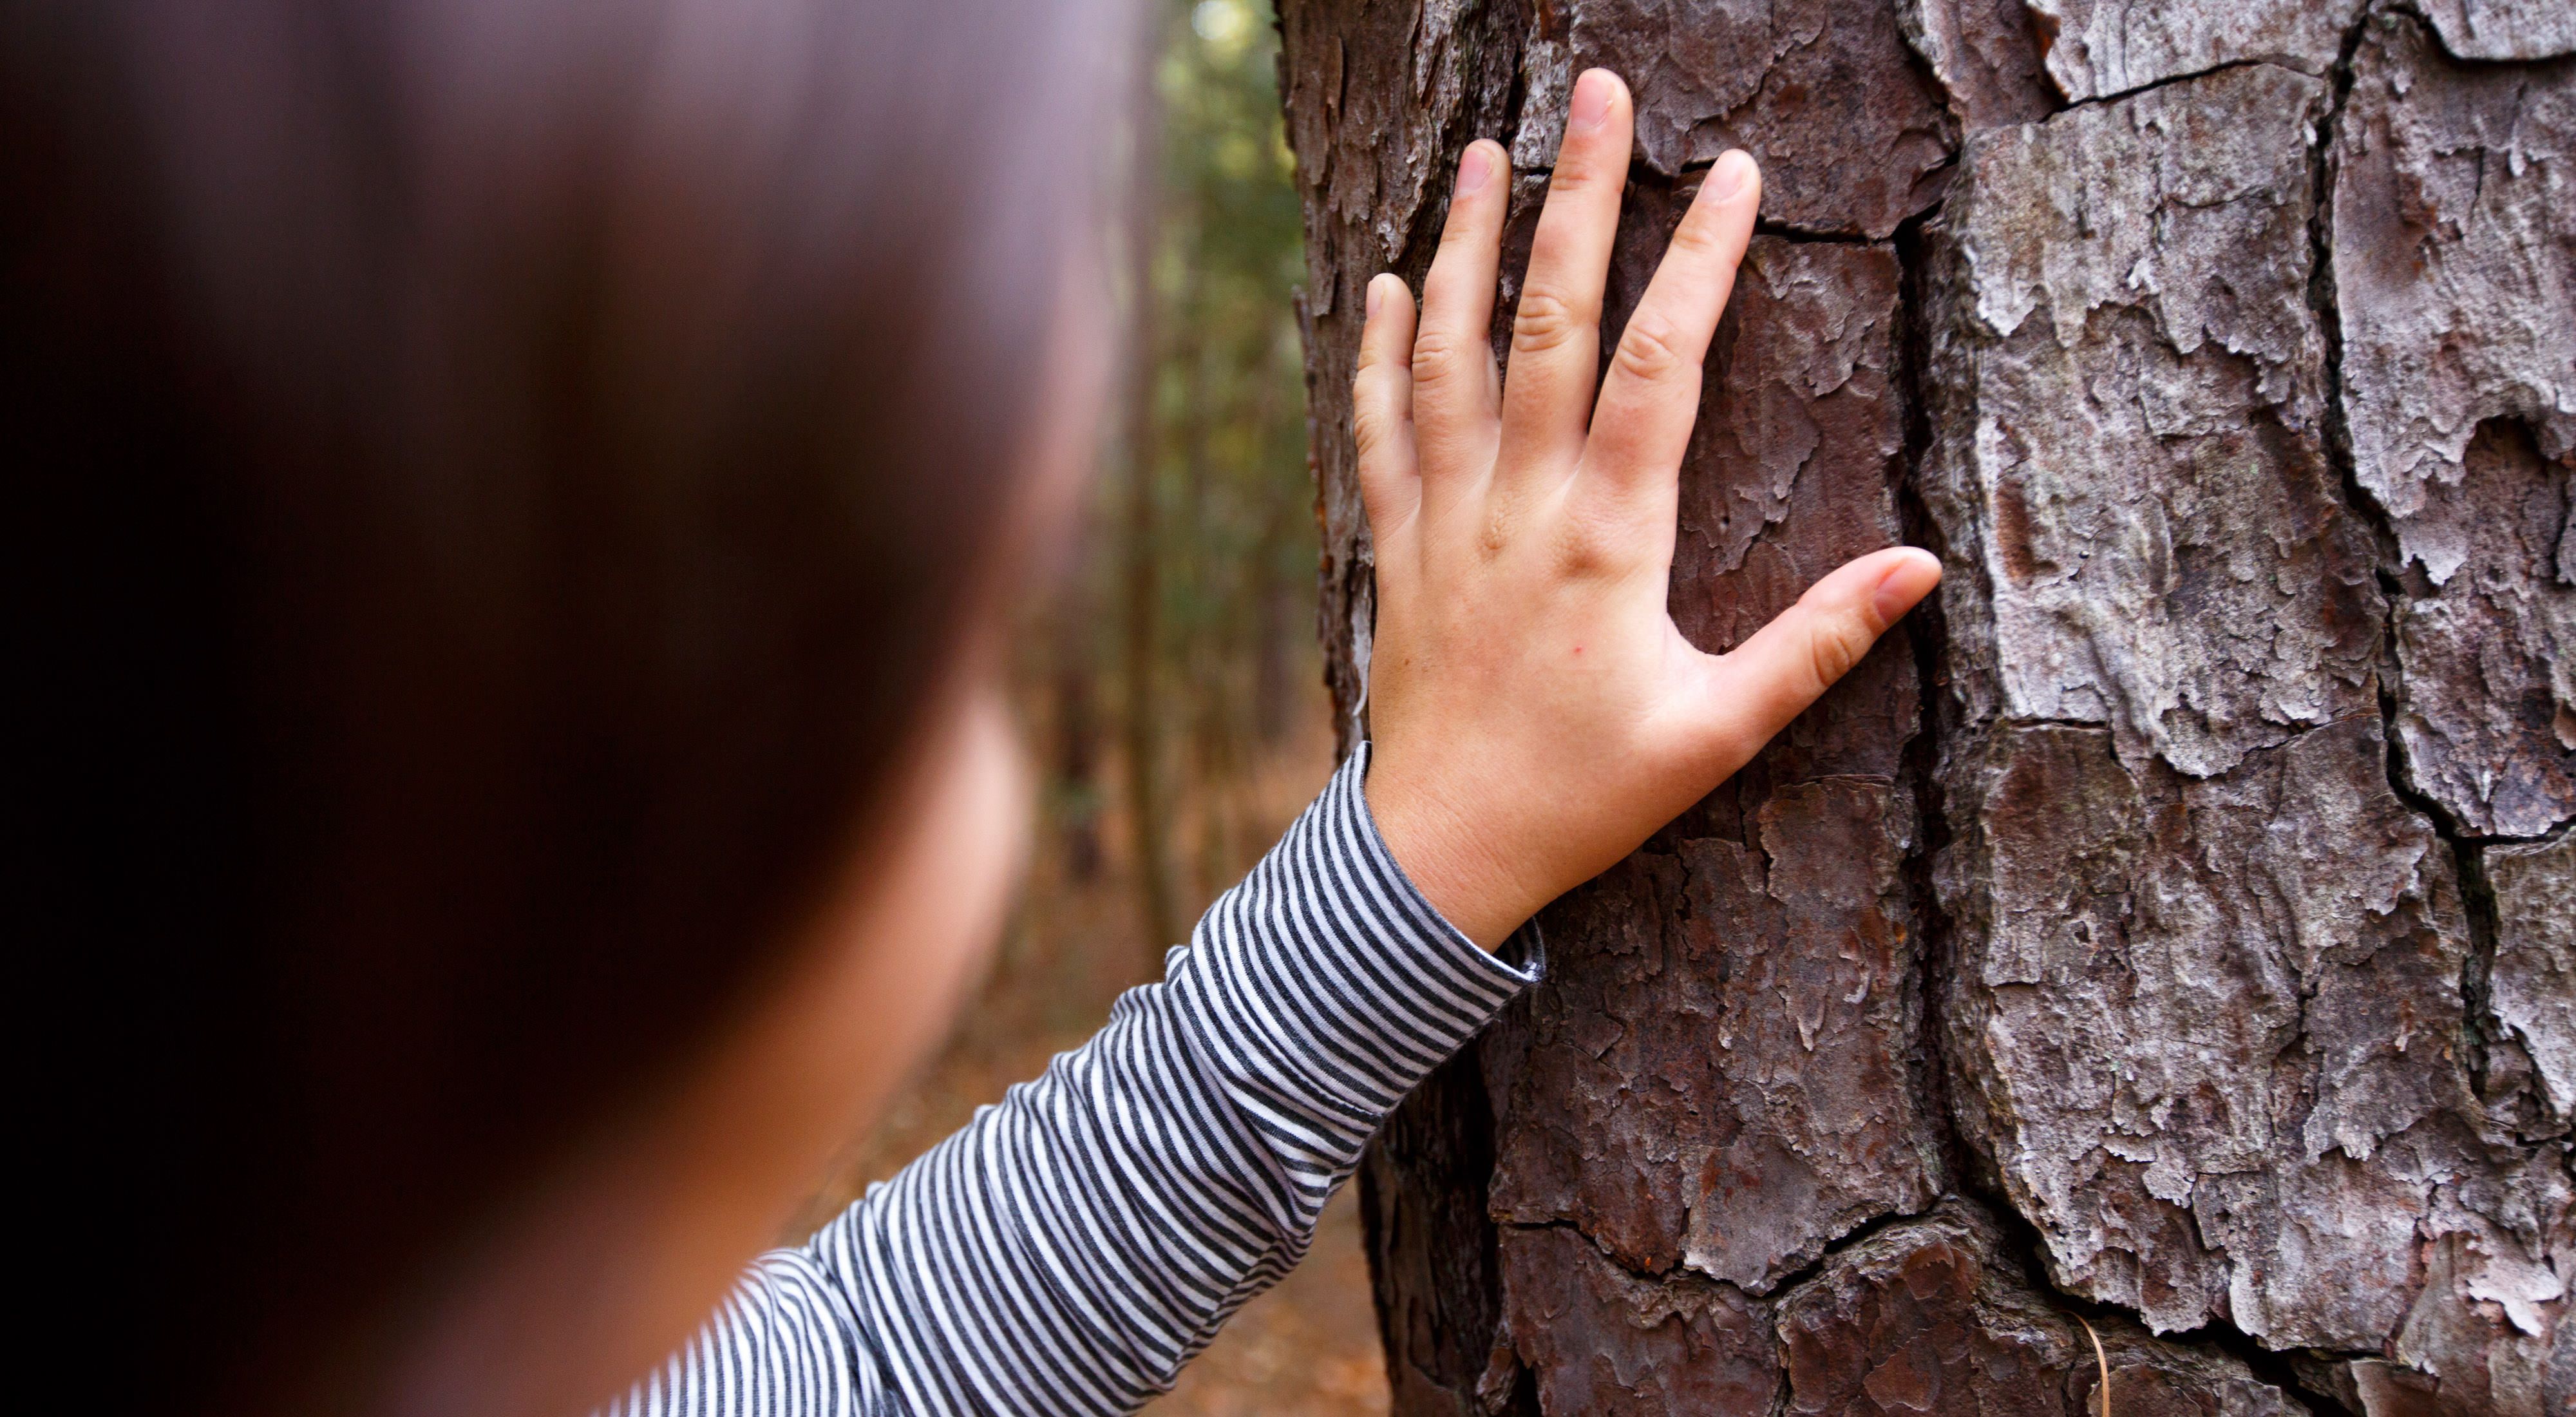 A young girl stands in front of a tall pine tree with her hand pressed against the tree's thick bark.